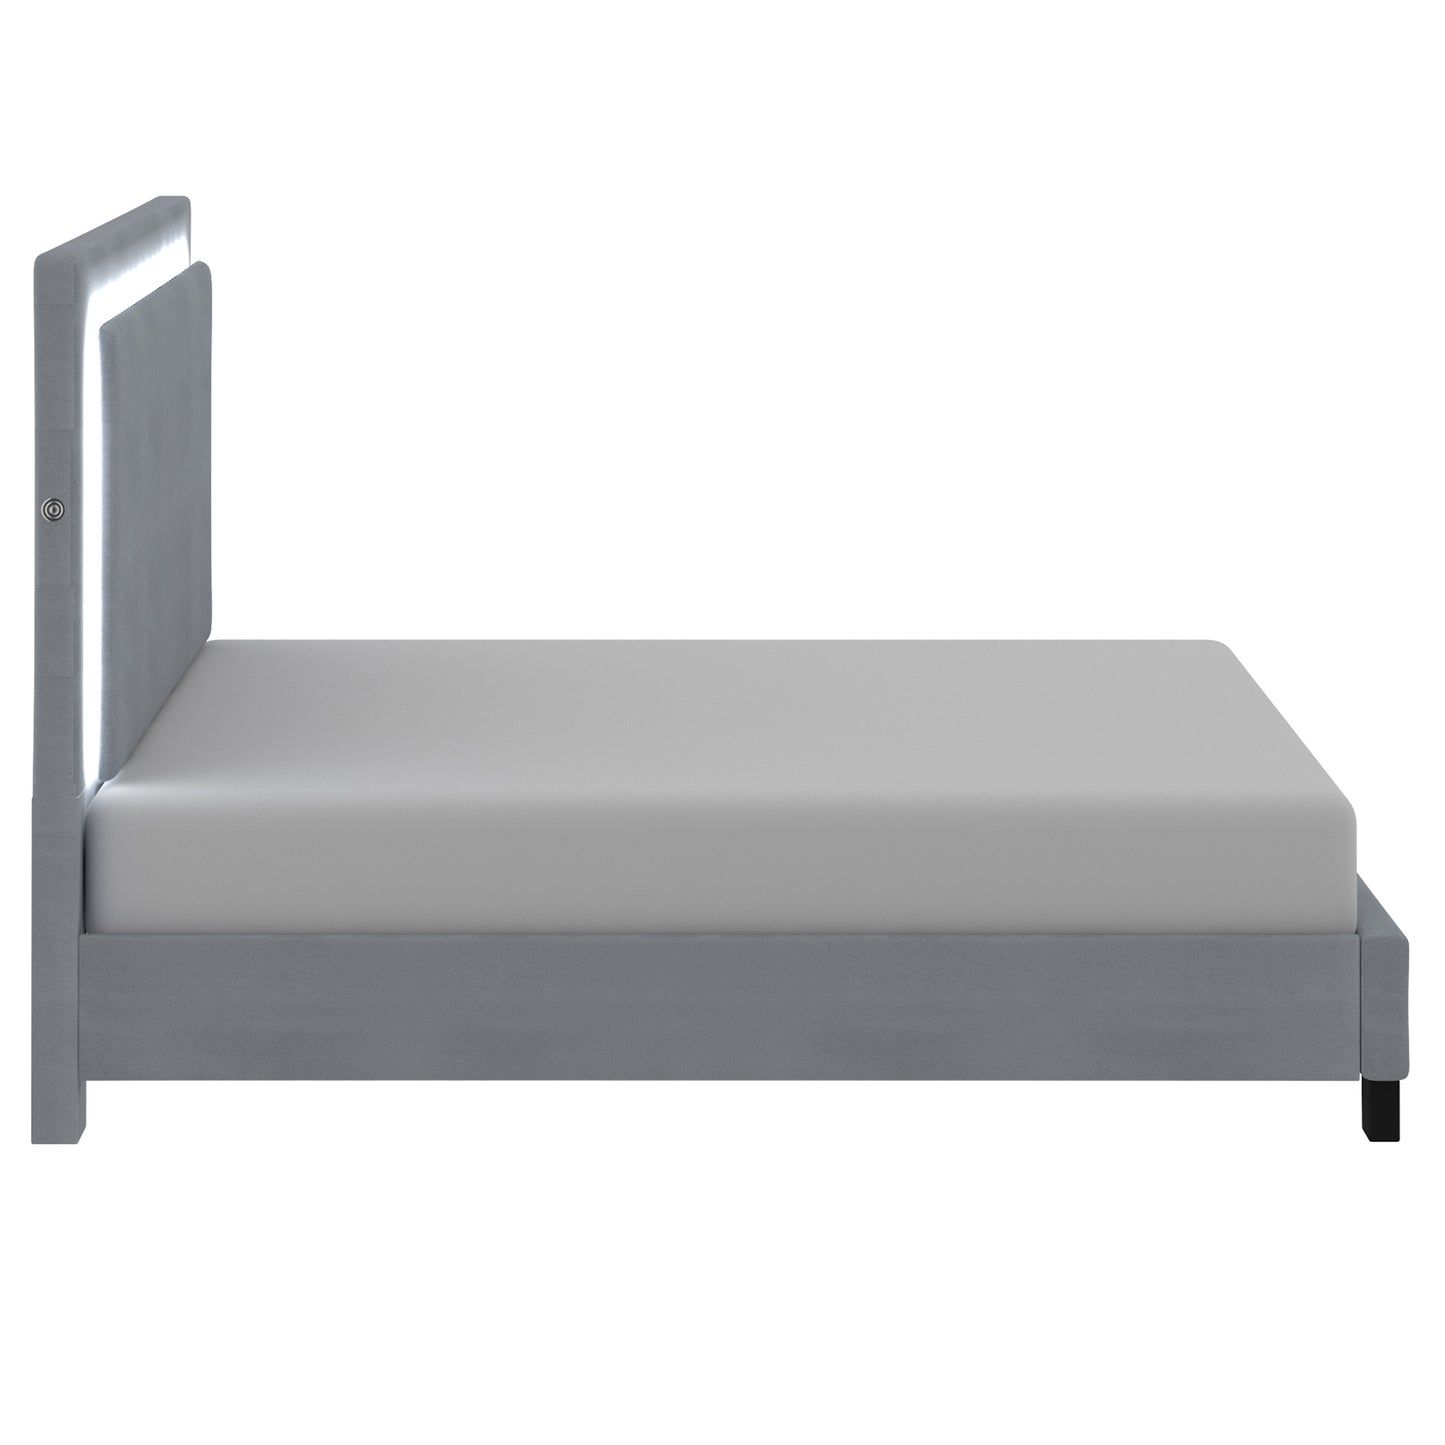 Queen Size- (Lumina Grey with light)- Fabric Bed Frame- with slats- INVENTORY CLEARANCE